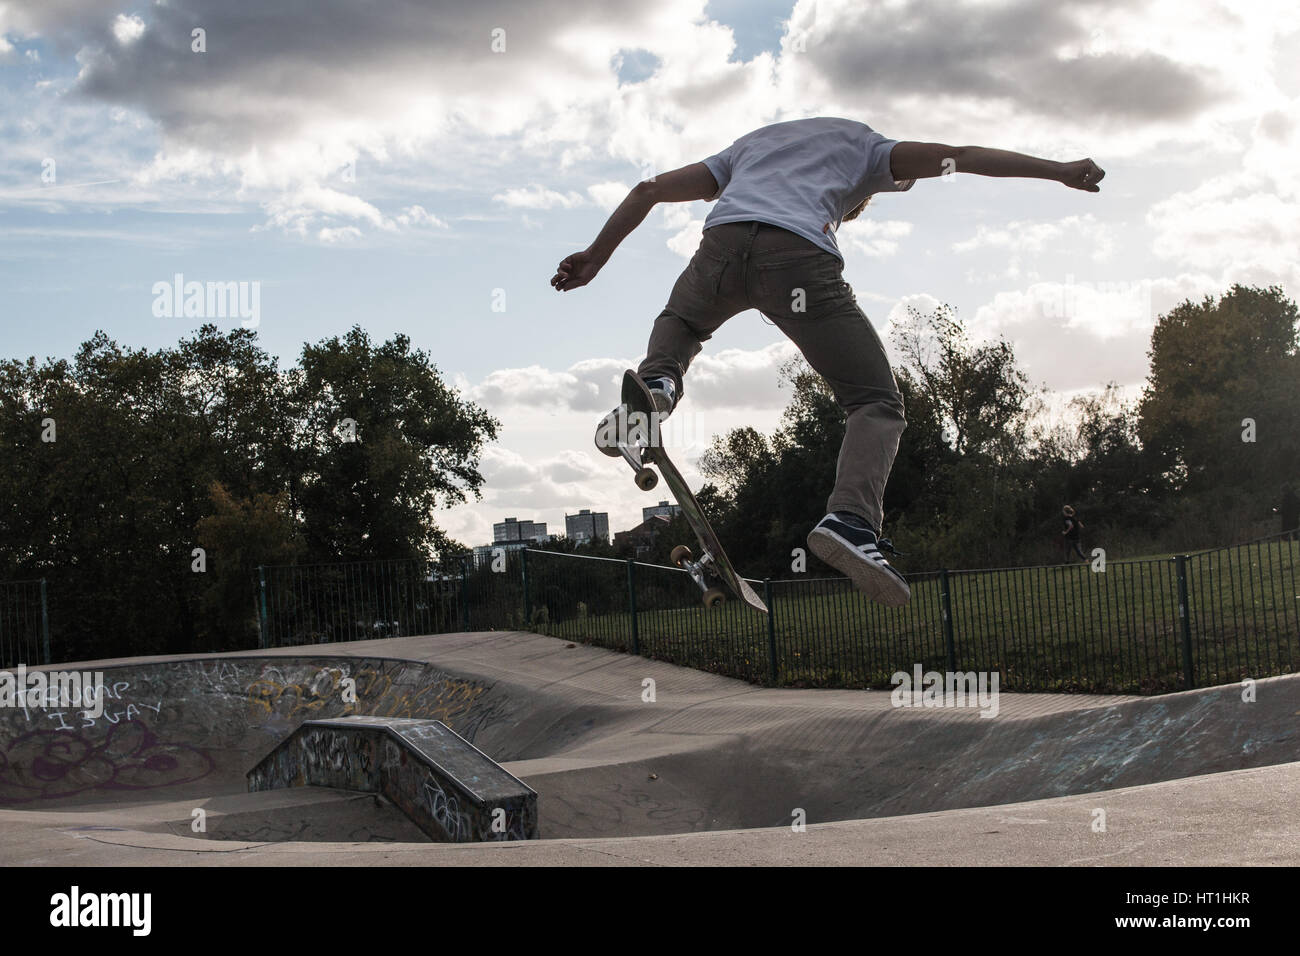 skater jumping at the skate ground in London Stock Photo